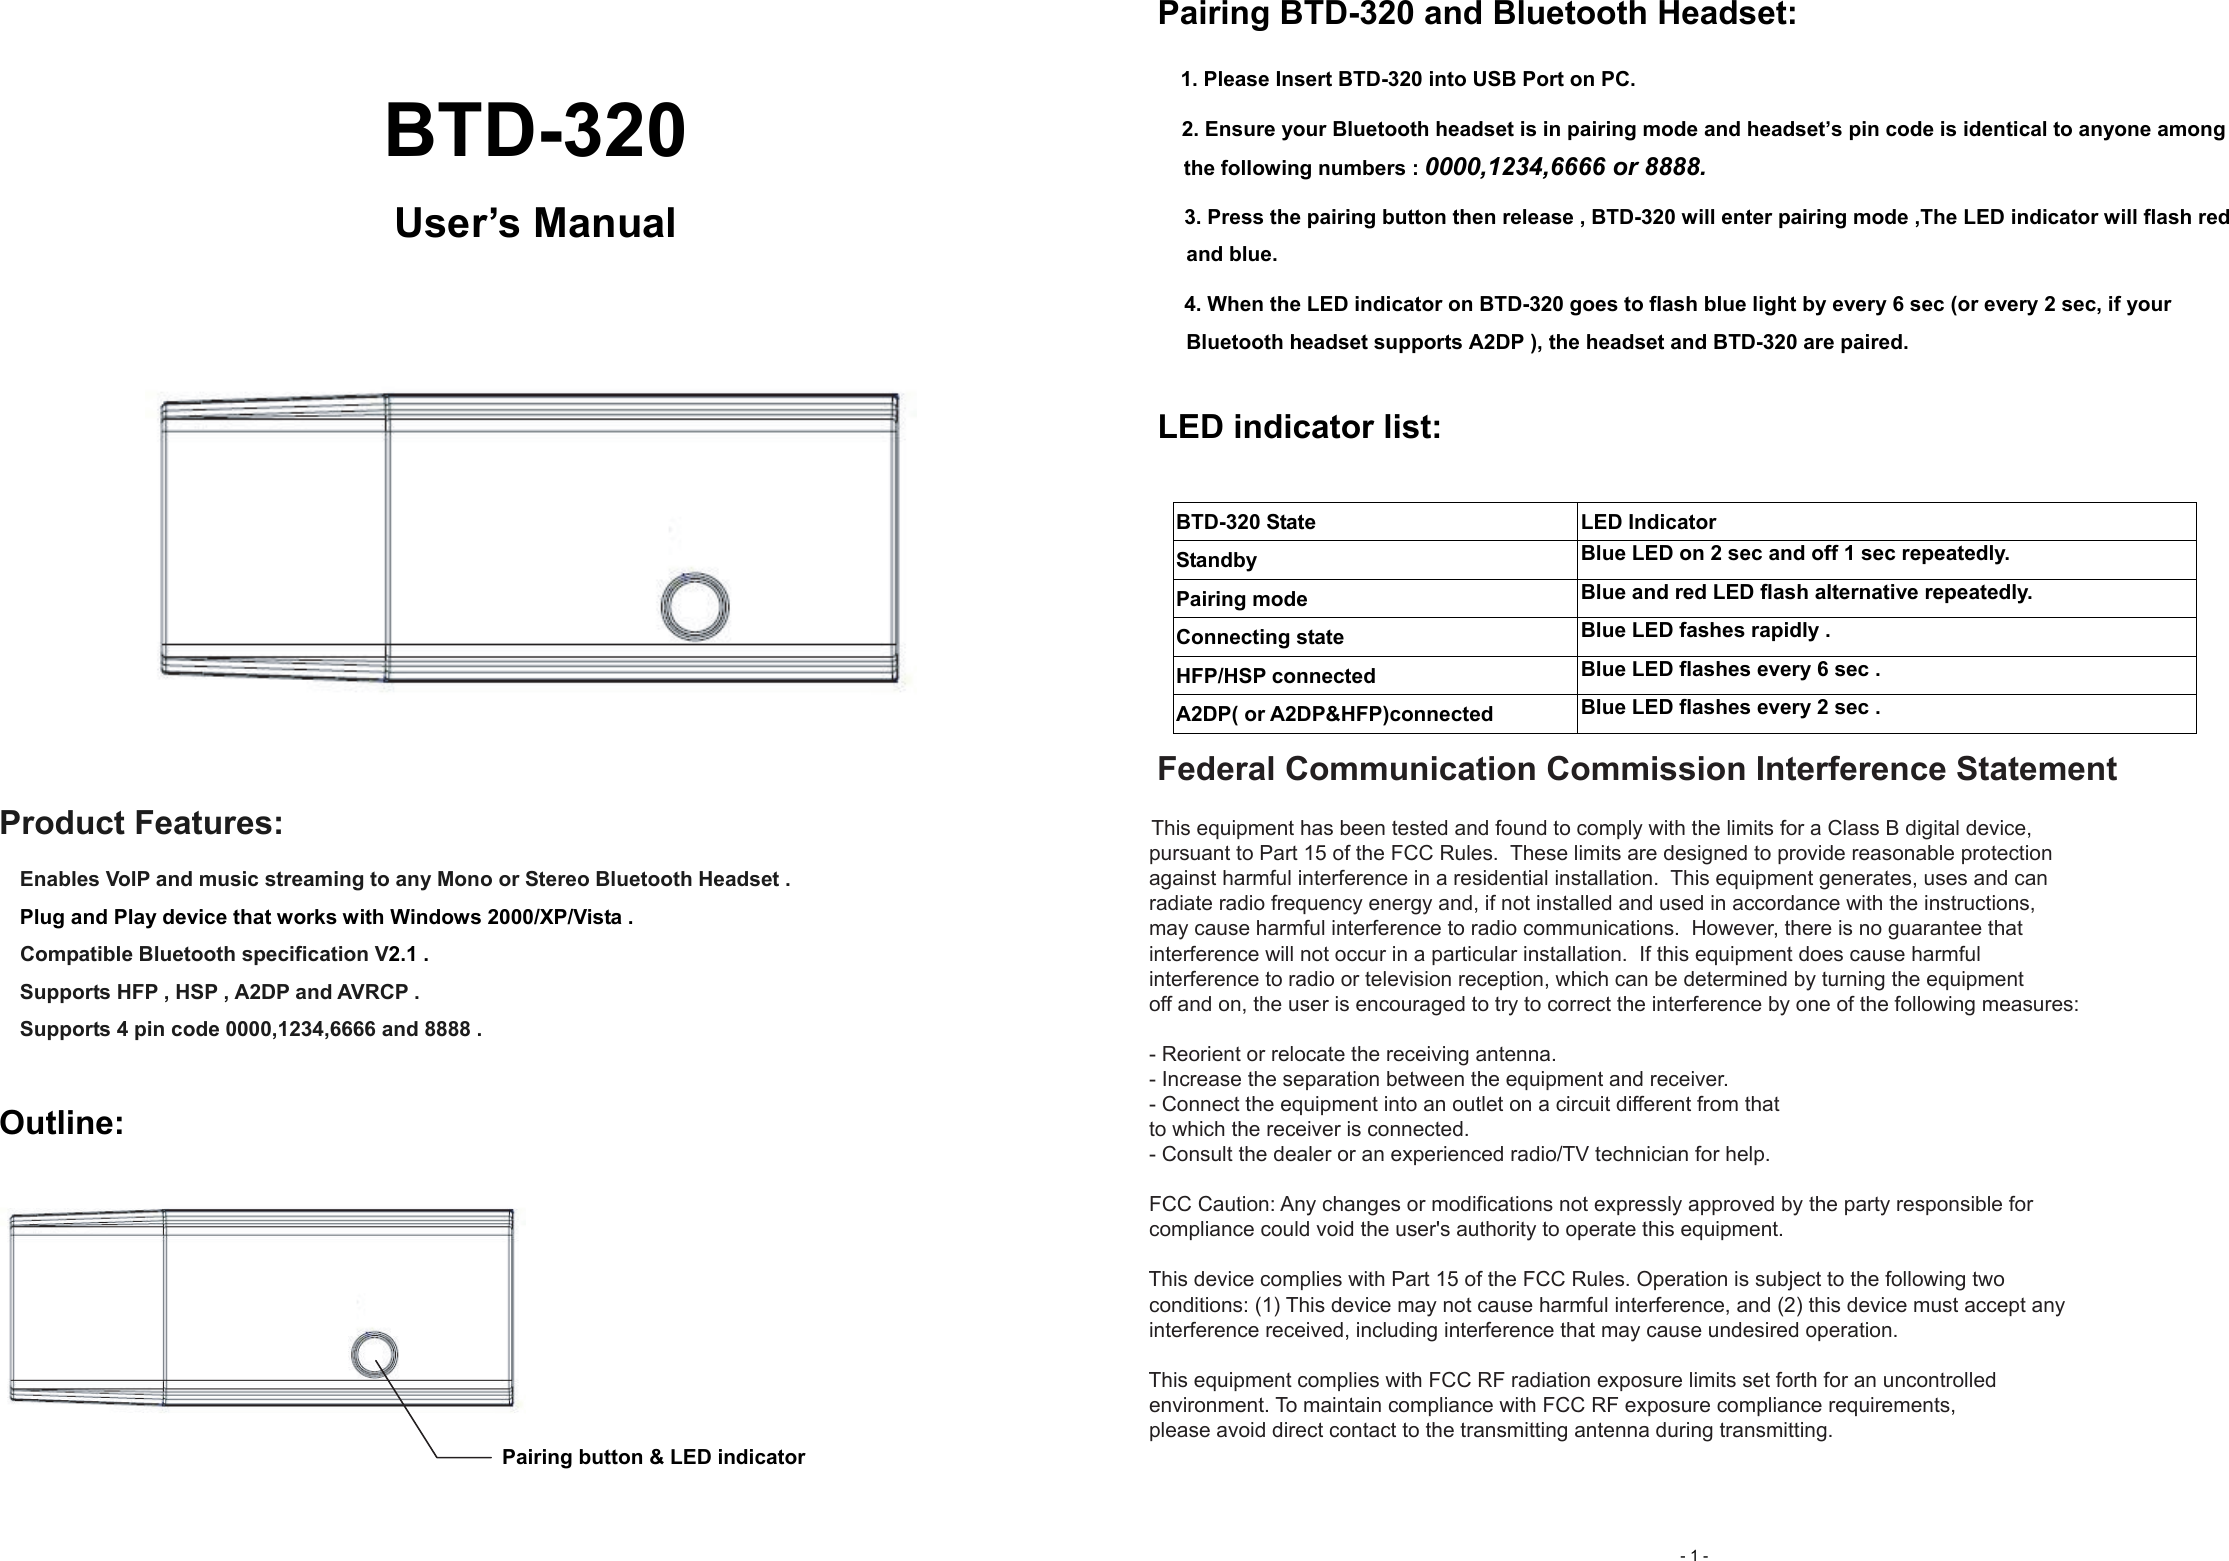     BTD-320 User’s Manual     Product Features:     Enables VolP and music streaming to any Mono or Stereo Bluetooth Headset .   Plug and Play device that works with Windows 2000/XP/Vista . Compatible Bluetooth specification V2.1 .     Supports HFP , HSP , A2DP and AVRCP .     Supports 4 pin code 0000,1234,6666 and 8888 .    Outline:  Pairing button &amp; LED indicator  Pairing BTD-320 and Bluetooth Headset: 1. Please Insert BTD-320 into USB Port on PC. 2. Ensure your Bluetooth headset is in pairing mode and headset’s pin code is identical to anyone among the following numbers : 0000,1234,6666 or 8888.   3. Press the pairing button then release , BTD-320 will enter pairing mode ,The LED indicator will flash red and blue. 4. When the LED indicator on BTD-320 goes to flash blue light by every 6 sec (or every 2 sec, if your Bluetooth headset supports A2DP ), the headset and BTD-320 are paired.     LED indicator list:  BTD-320 State  LED Indicator Standby  Blue LED on 2 sec and off 1 sec repeatedly. Pairing mode  Blue and red LED flash alternative repeatedly. Connecting state  Blue LED fashes rapidly . HFP/HSP connected  Blue LED flashes every 6 sec . A2DP( or A2DP&amp;HFP)connected  Blue LED flashes every 2 sec .   - 1 -      Federal Communication Commission Interference Statement       This equipment has been tested and found to comply with the limits for a Class B digital device,      pursuant to Part 15 of the FCC Rules.  These limits are designed to provide reasonable protection      against harmful interference in a residential installation.  This equipment generates, uses and can      radiate radio frequency energy and, if not installed and used in accordance with the instructions,      may cause harmful interference to radio communications.  However, there is no guarantee that      interference will not occur in a particular installation.  If this equipment does cause harmful     interference to radio or television reception, which can be determined by turning the equipment      off and on, the user is encouraged to try to correct the interference by one of the following measures:      - Reorient or relocate the receiving antenna.     - Increase the separation between the equipment and receiver.     - Connect the equipment into an outlet on a circuit different from that     to which the receiver is connected.     - Consult the dealer or an experienced radio/TV technician for help.      FCC Caution: Any changes or modifications not expressly approved by the party responsible for      compliance could void the user&apos;s authority to operate this equipment.      This device complies with Part 15 of the FCC Rules. Operation is subject to the following two      conditions: (1) This device may not cause harmful interference, and (2) this device must accept any      interference received, including interference that may cause undesired operation.      This equipment complies with FCC RF radiation exposure limits set forth for an uncontrolled     environment. To maintain compliance with FCC RF exposure compliance requirements,      please avoid direct contact to the transmitting antenna during transmitting. 